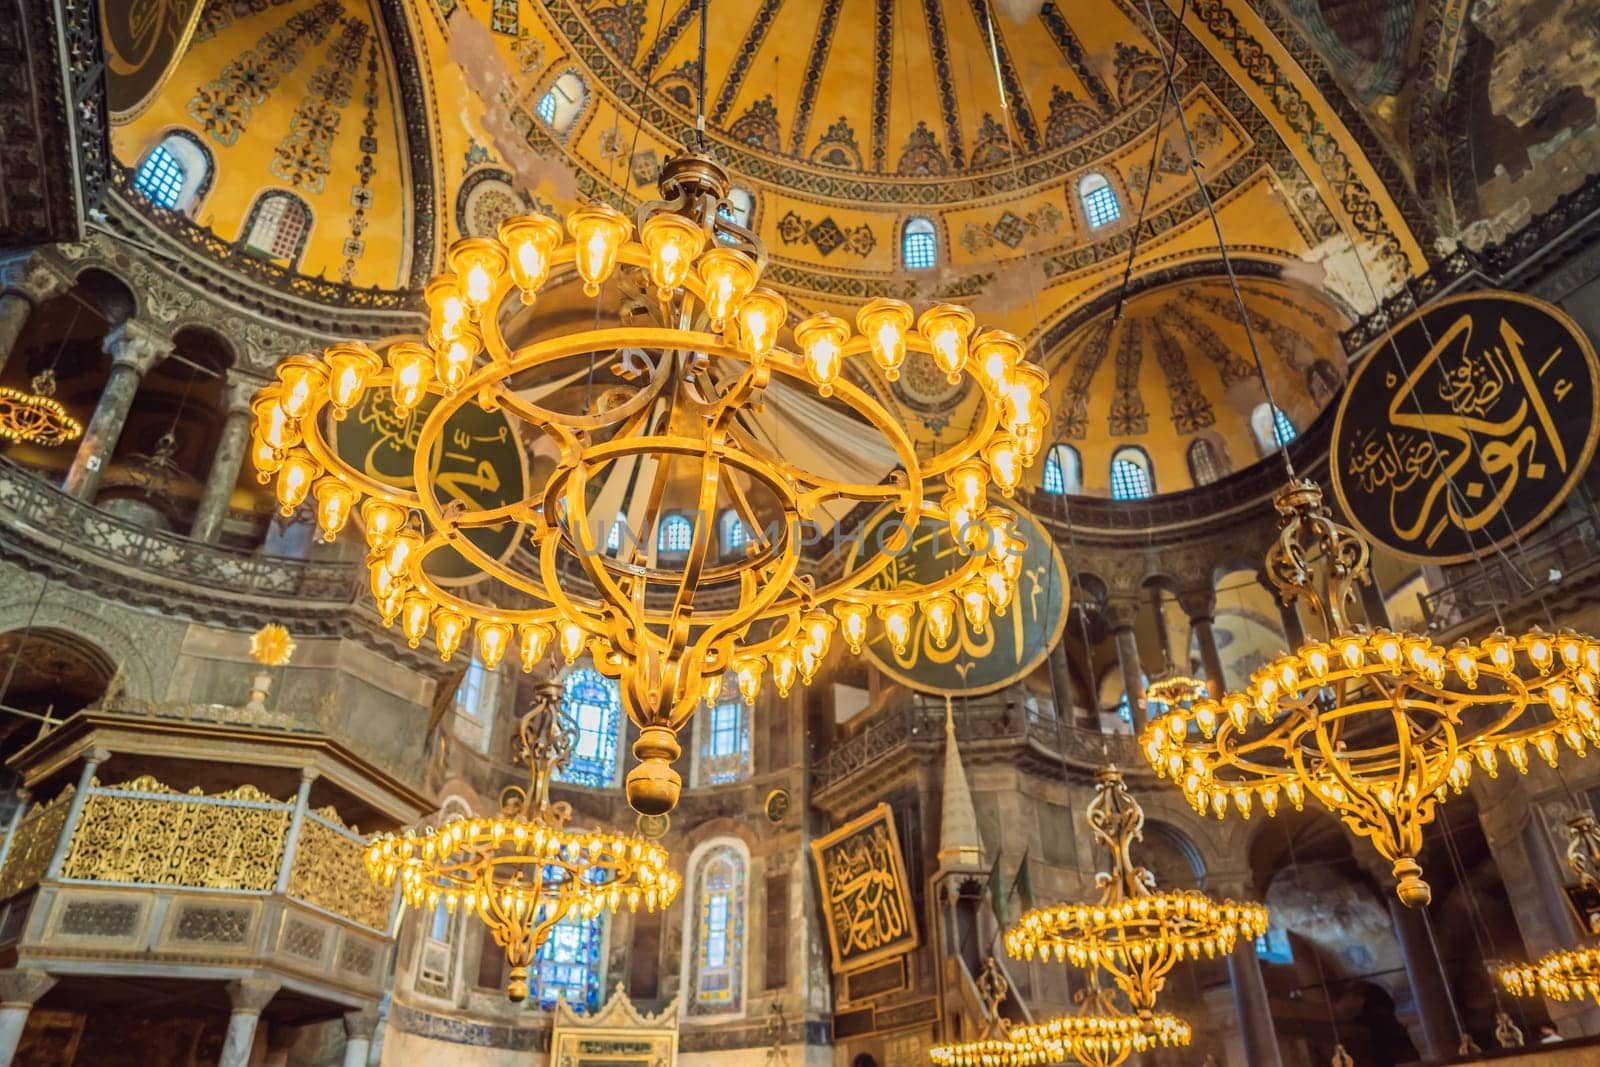 INSCRIPTION - large round medallions with inscriptions denoting the names of Allah, the Prophet Muhammad, as well as the first 4 caliphs. Hagia Sophia Hagia Sofia, Ayasofya interior in Istanbul, Turkey, Byzantine architecture, city landmark and architectural world wonder. Turkiye by galitskaya